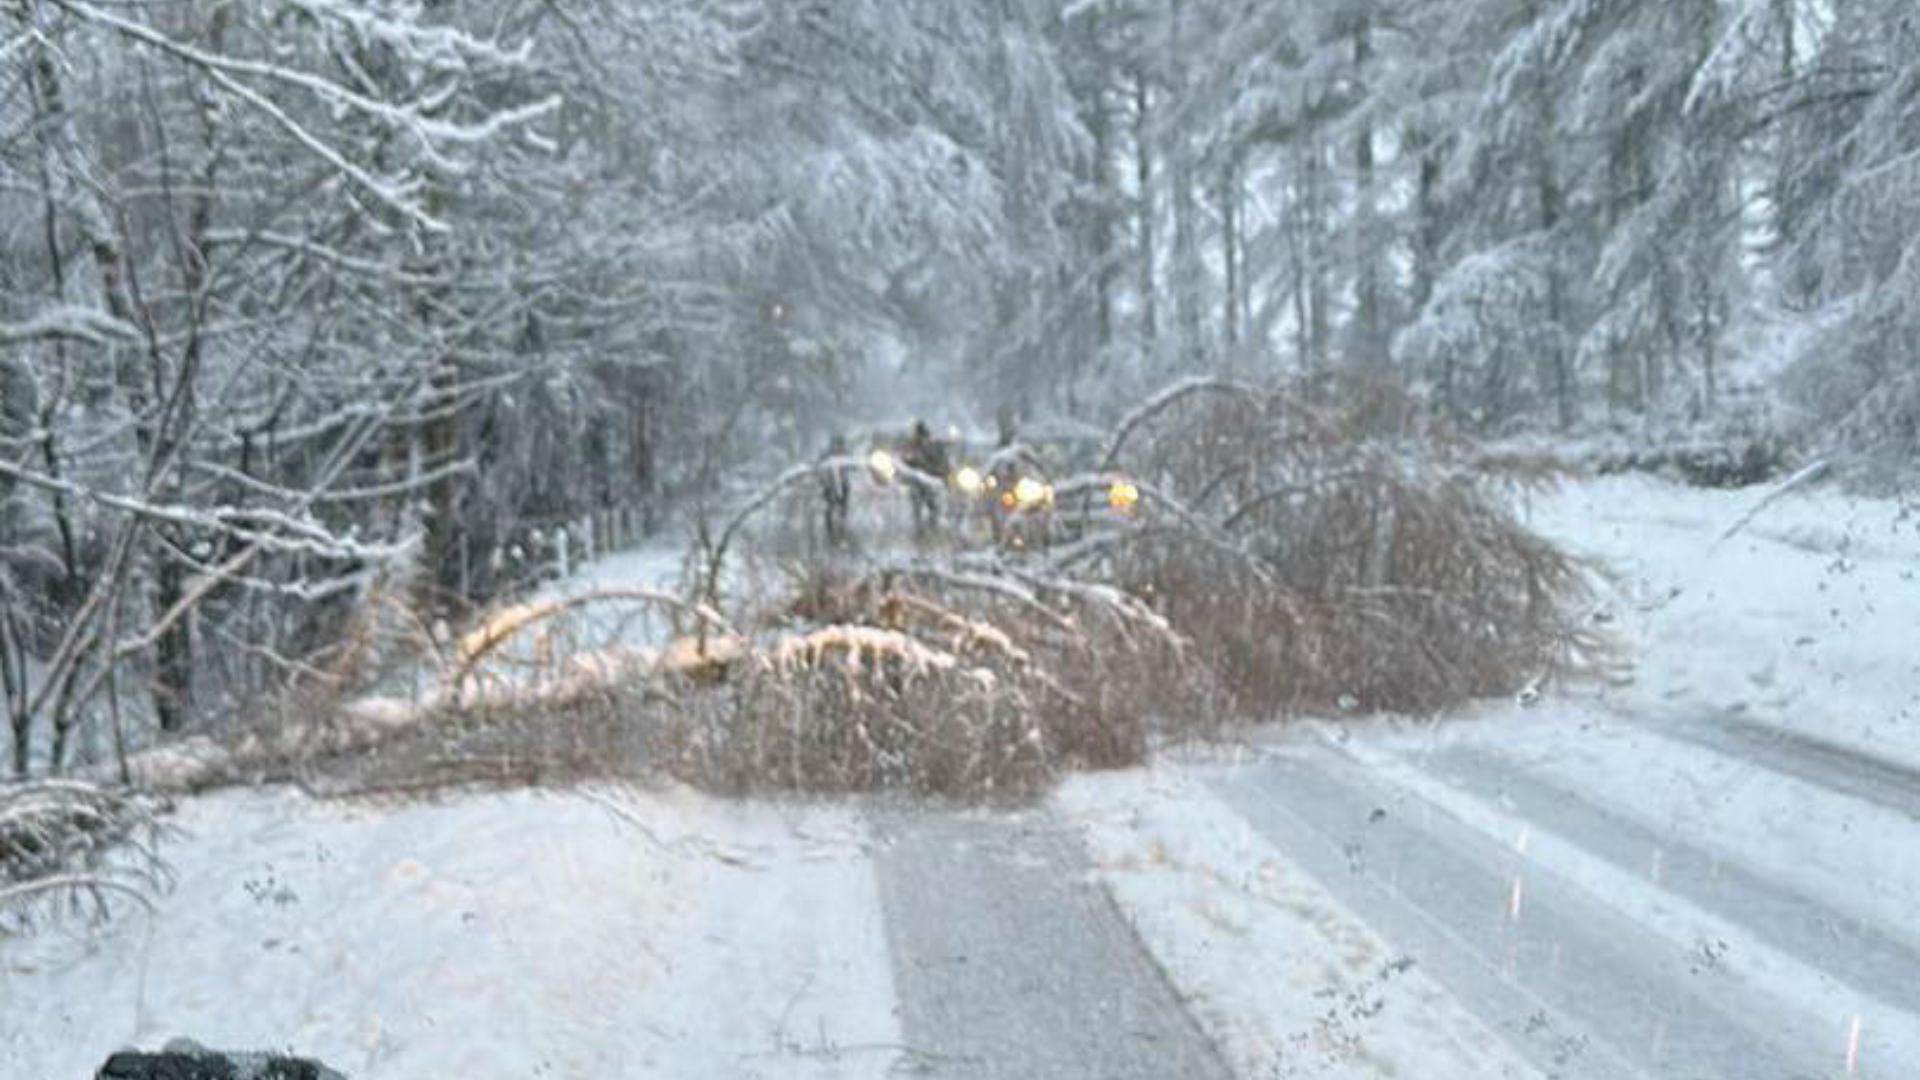 The road between Tillyfourie and Millbank is blocked by a fallen tree, reported Fubar News, after Arctic temperatures left a covering of snow across the Aberdeenshire.